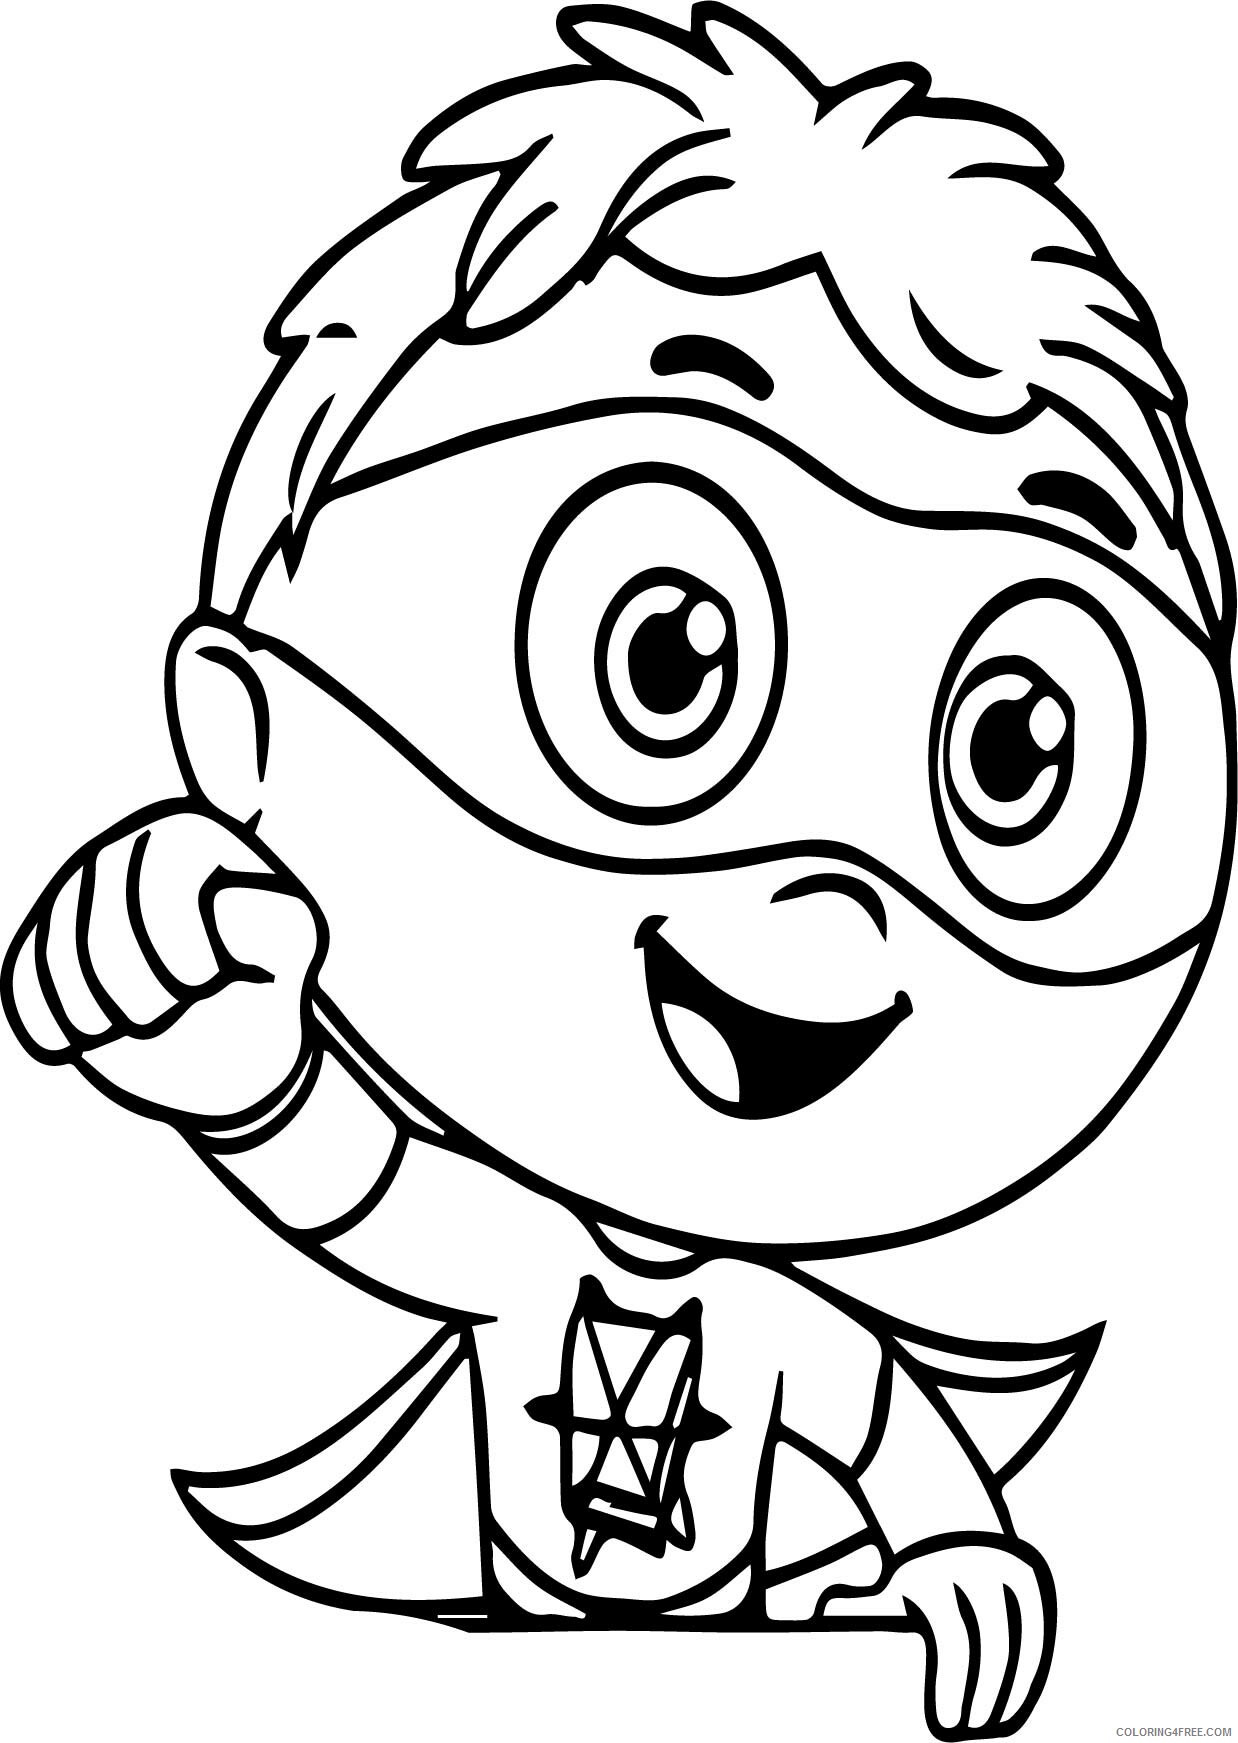 Super Why Coloring Pages TV Film Download Free Super Why Printable 2020 08301 Coloring4free